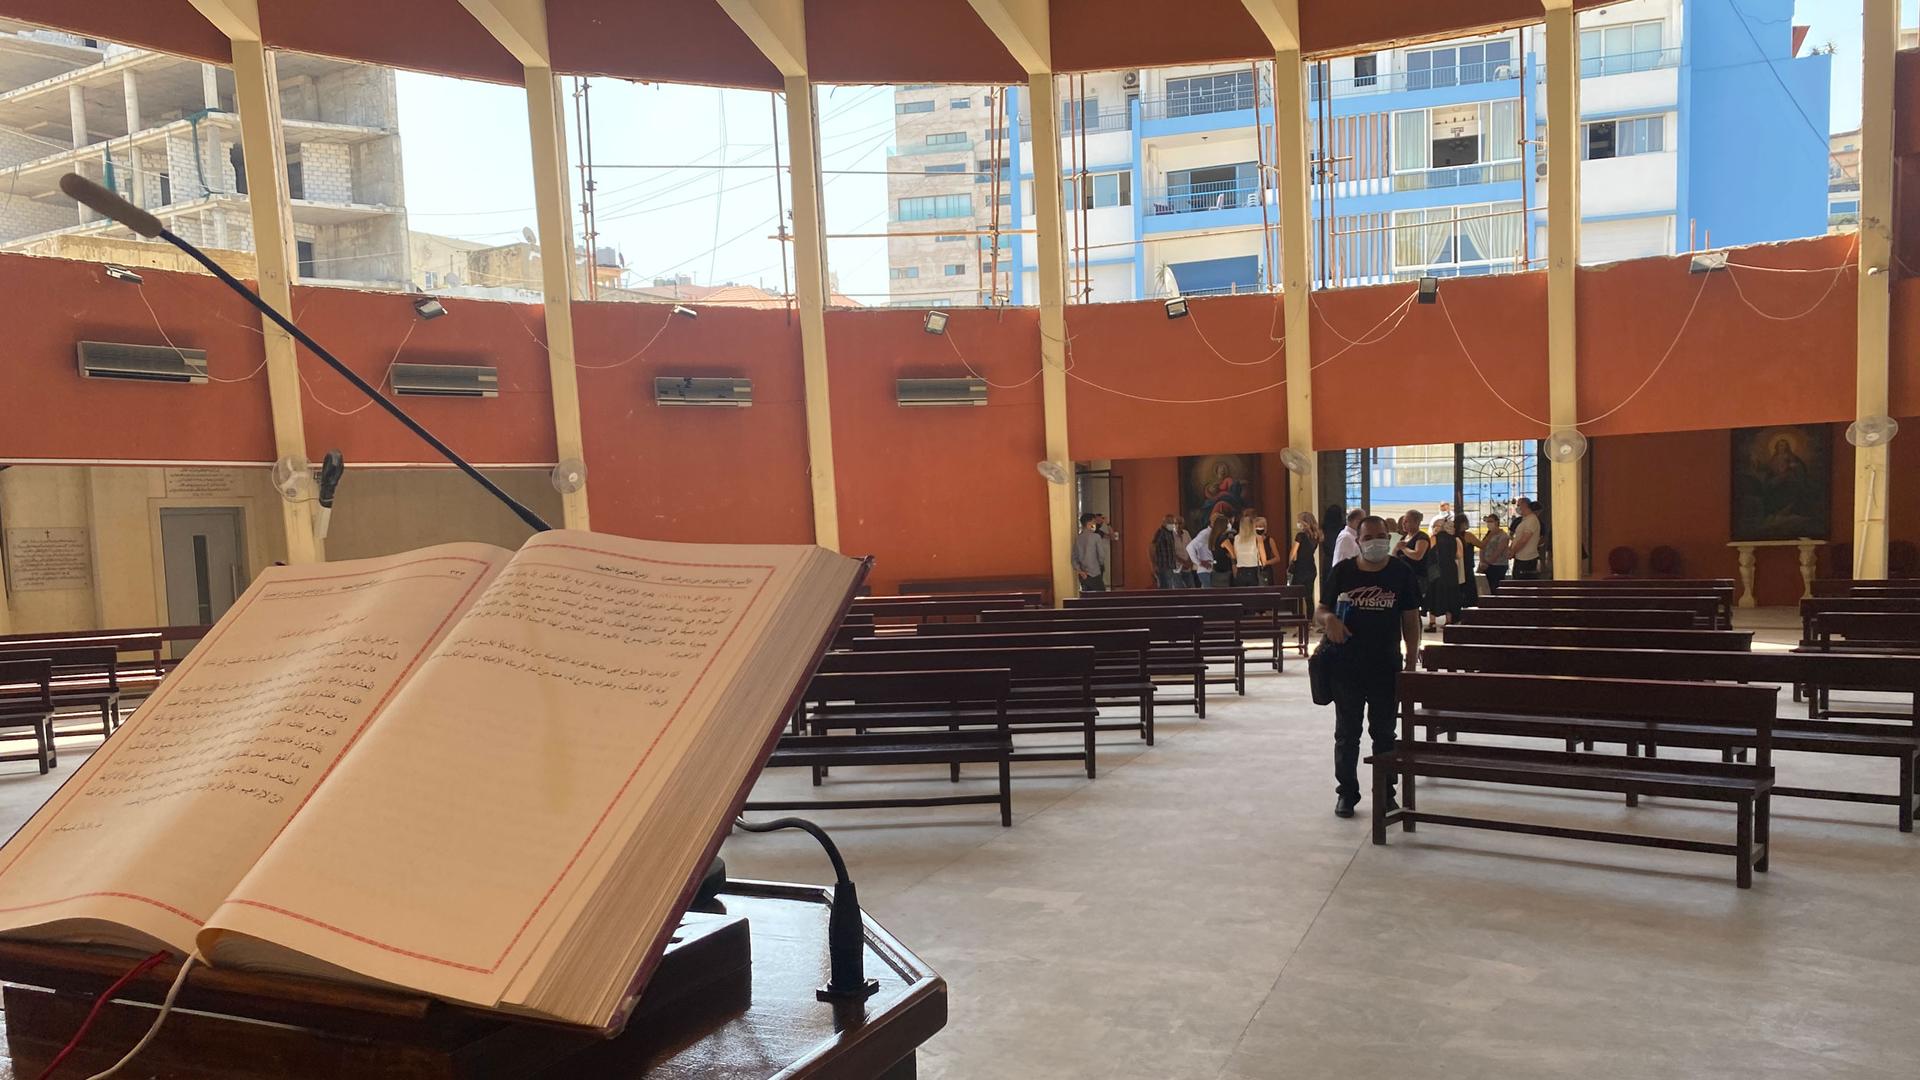 In a church about a mile from Beirut’s port, Sunday mass occurs with just a few dozen worshipers in the massive hall.